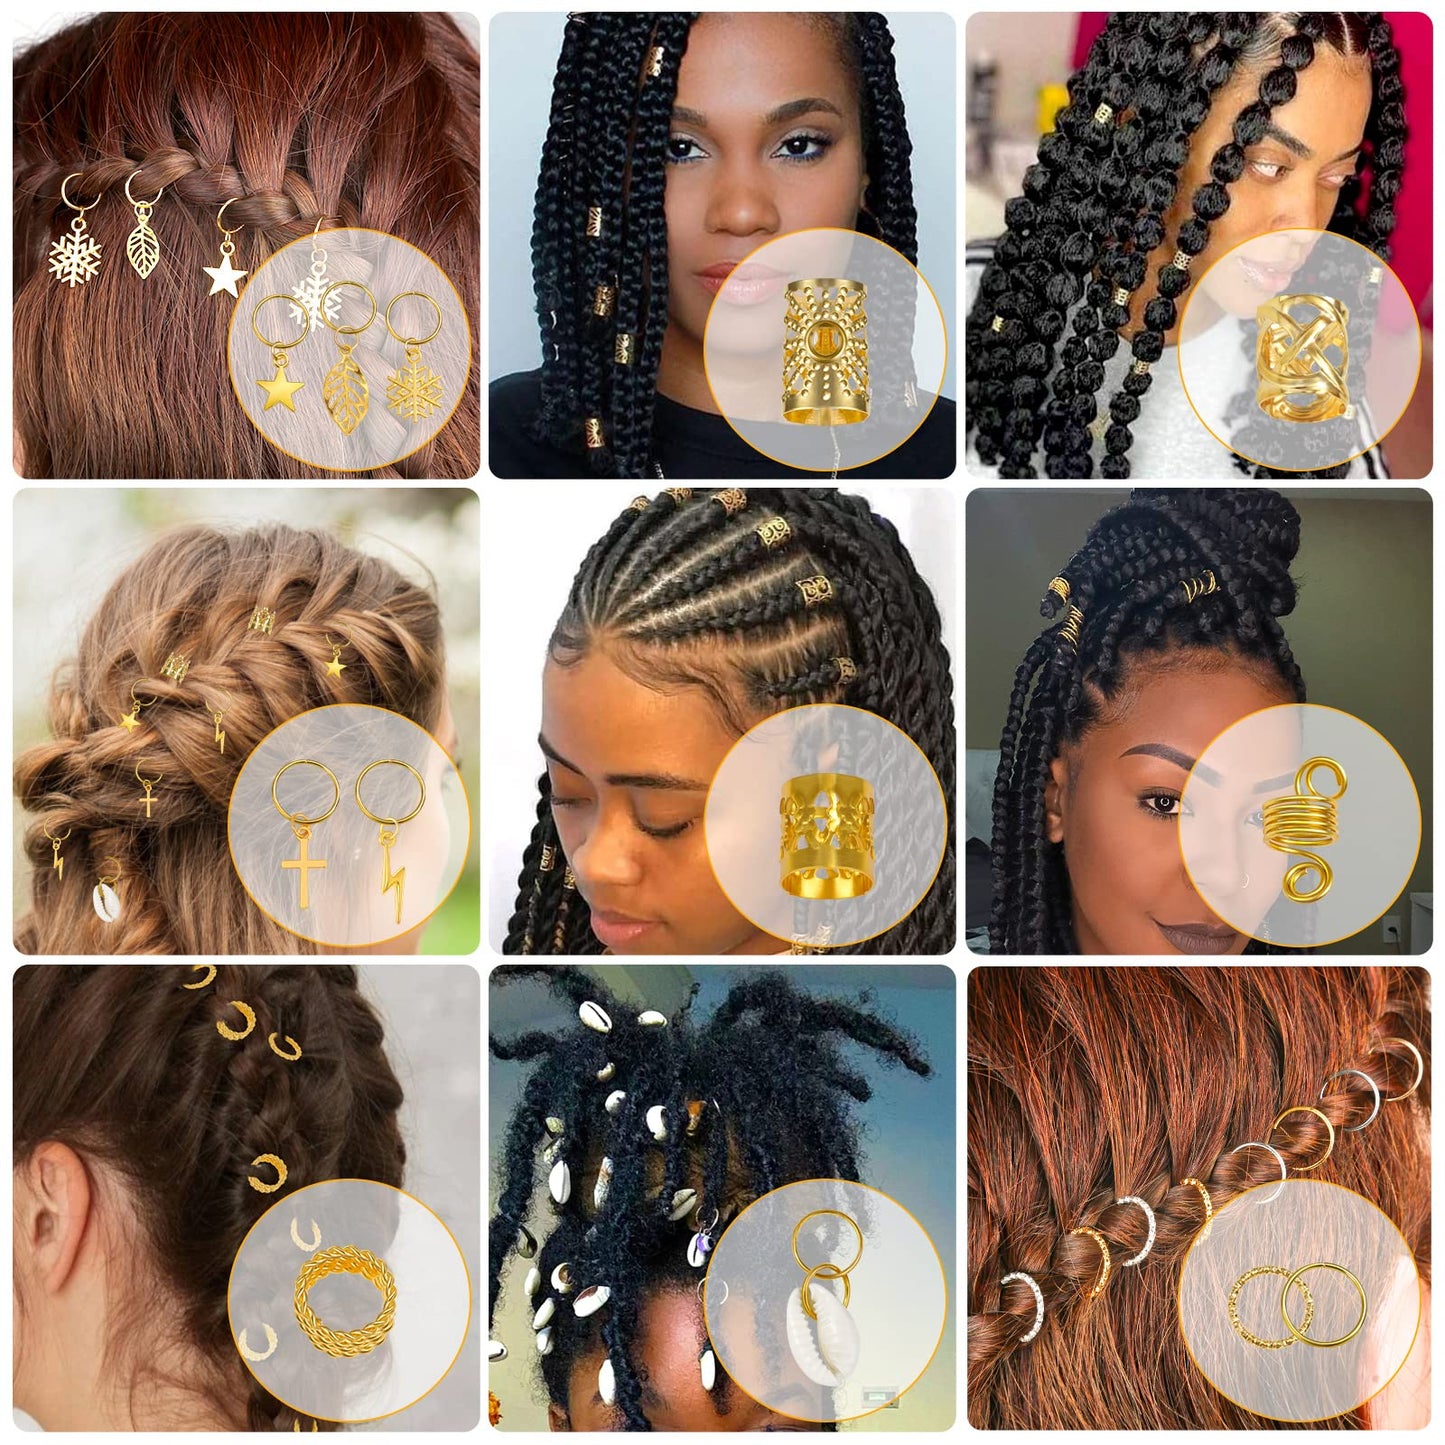 Lucomb 259 Pcs Hair Jewelry for Braids, Loc Jewelry for Hair Dreadlock for Women, Metal Gold Rings Cuffs Clips for Dreadlock Accessories Hair Braids Jewelry Decorations